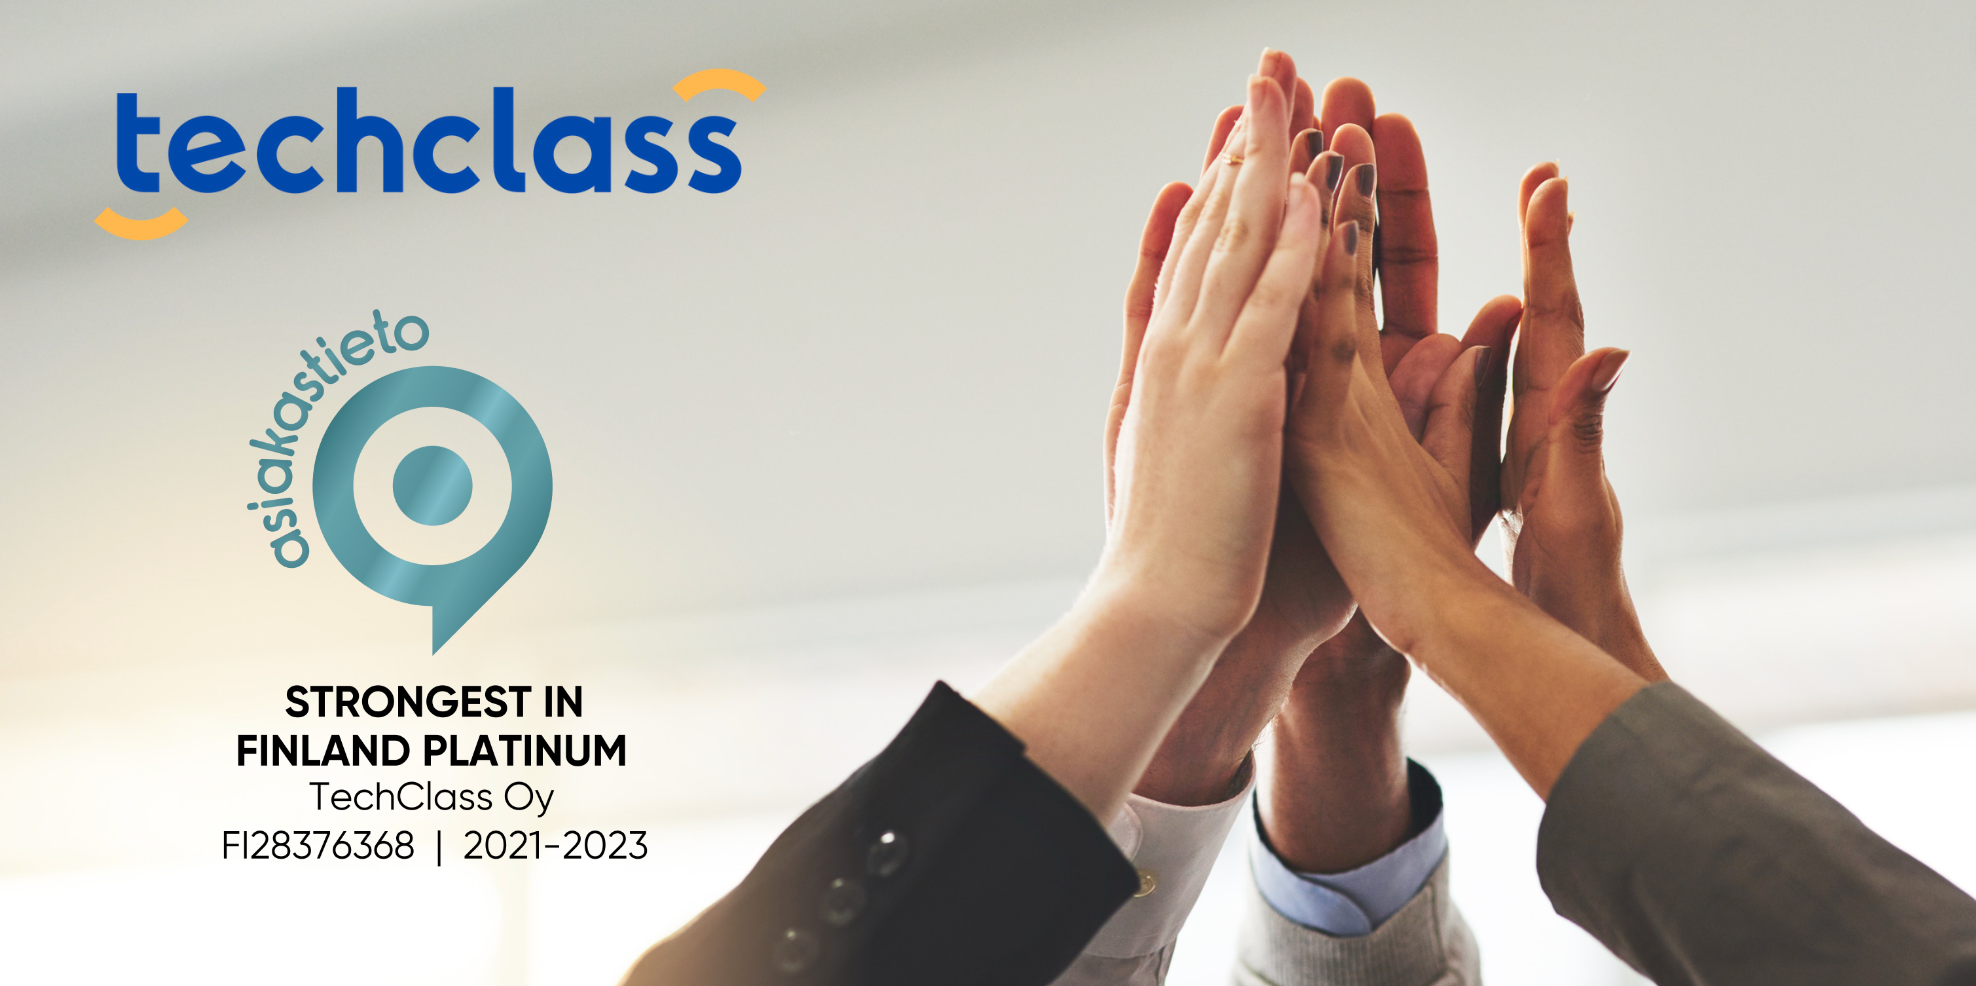 Our Milestone Achievement as Finland's Strongest Platinum Certified Training Company